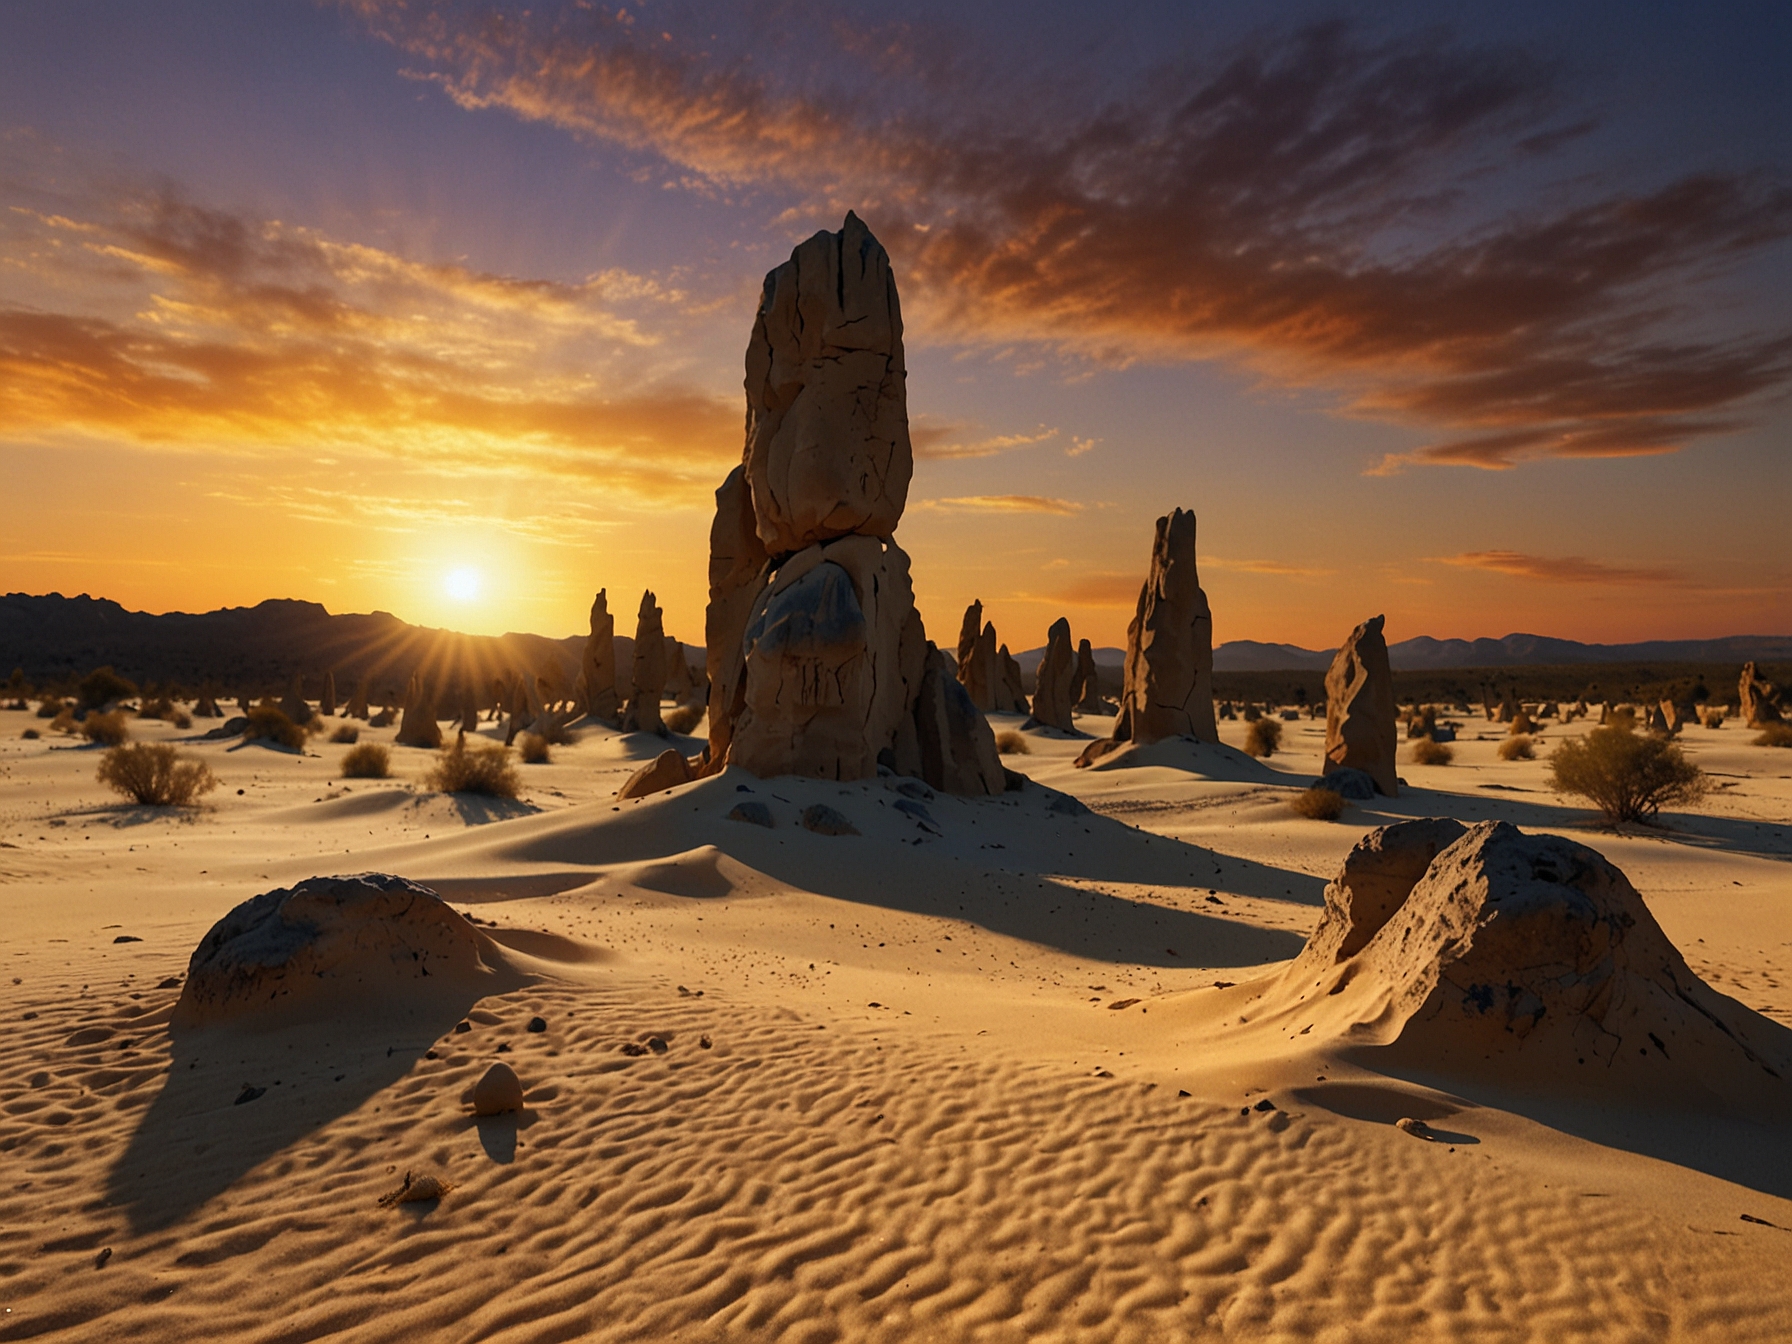 The mystical landscape of the Pinnacles Desert in Nambung National Park, showcasing limestone pillars rising from golden sands, captured at sunset with shadows creating an ethereal view.